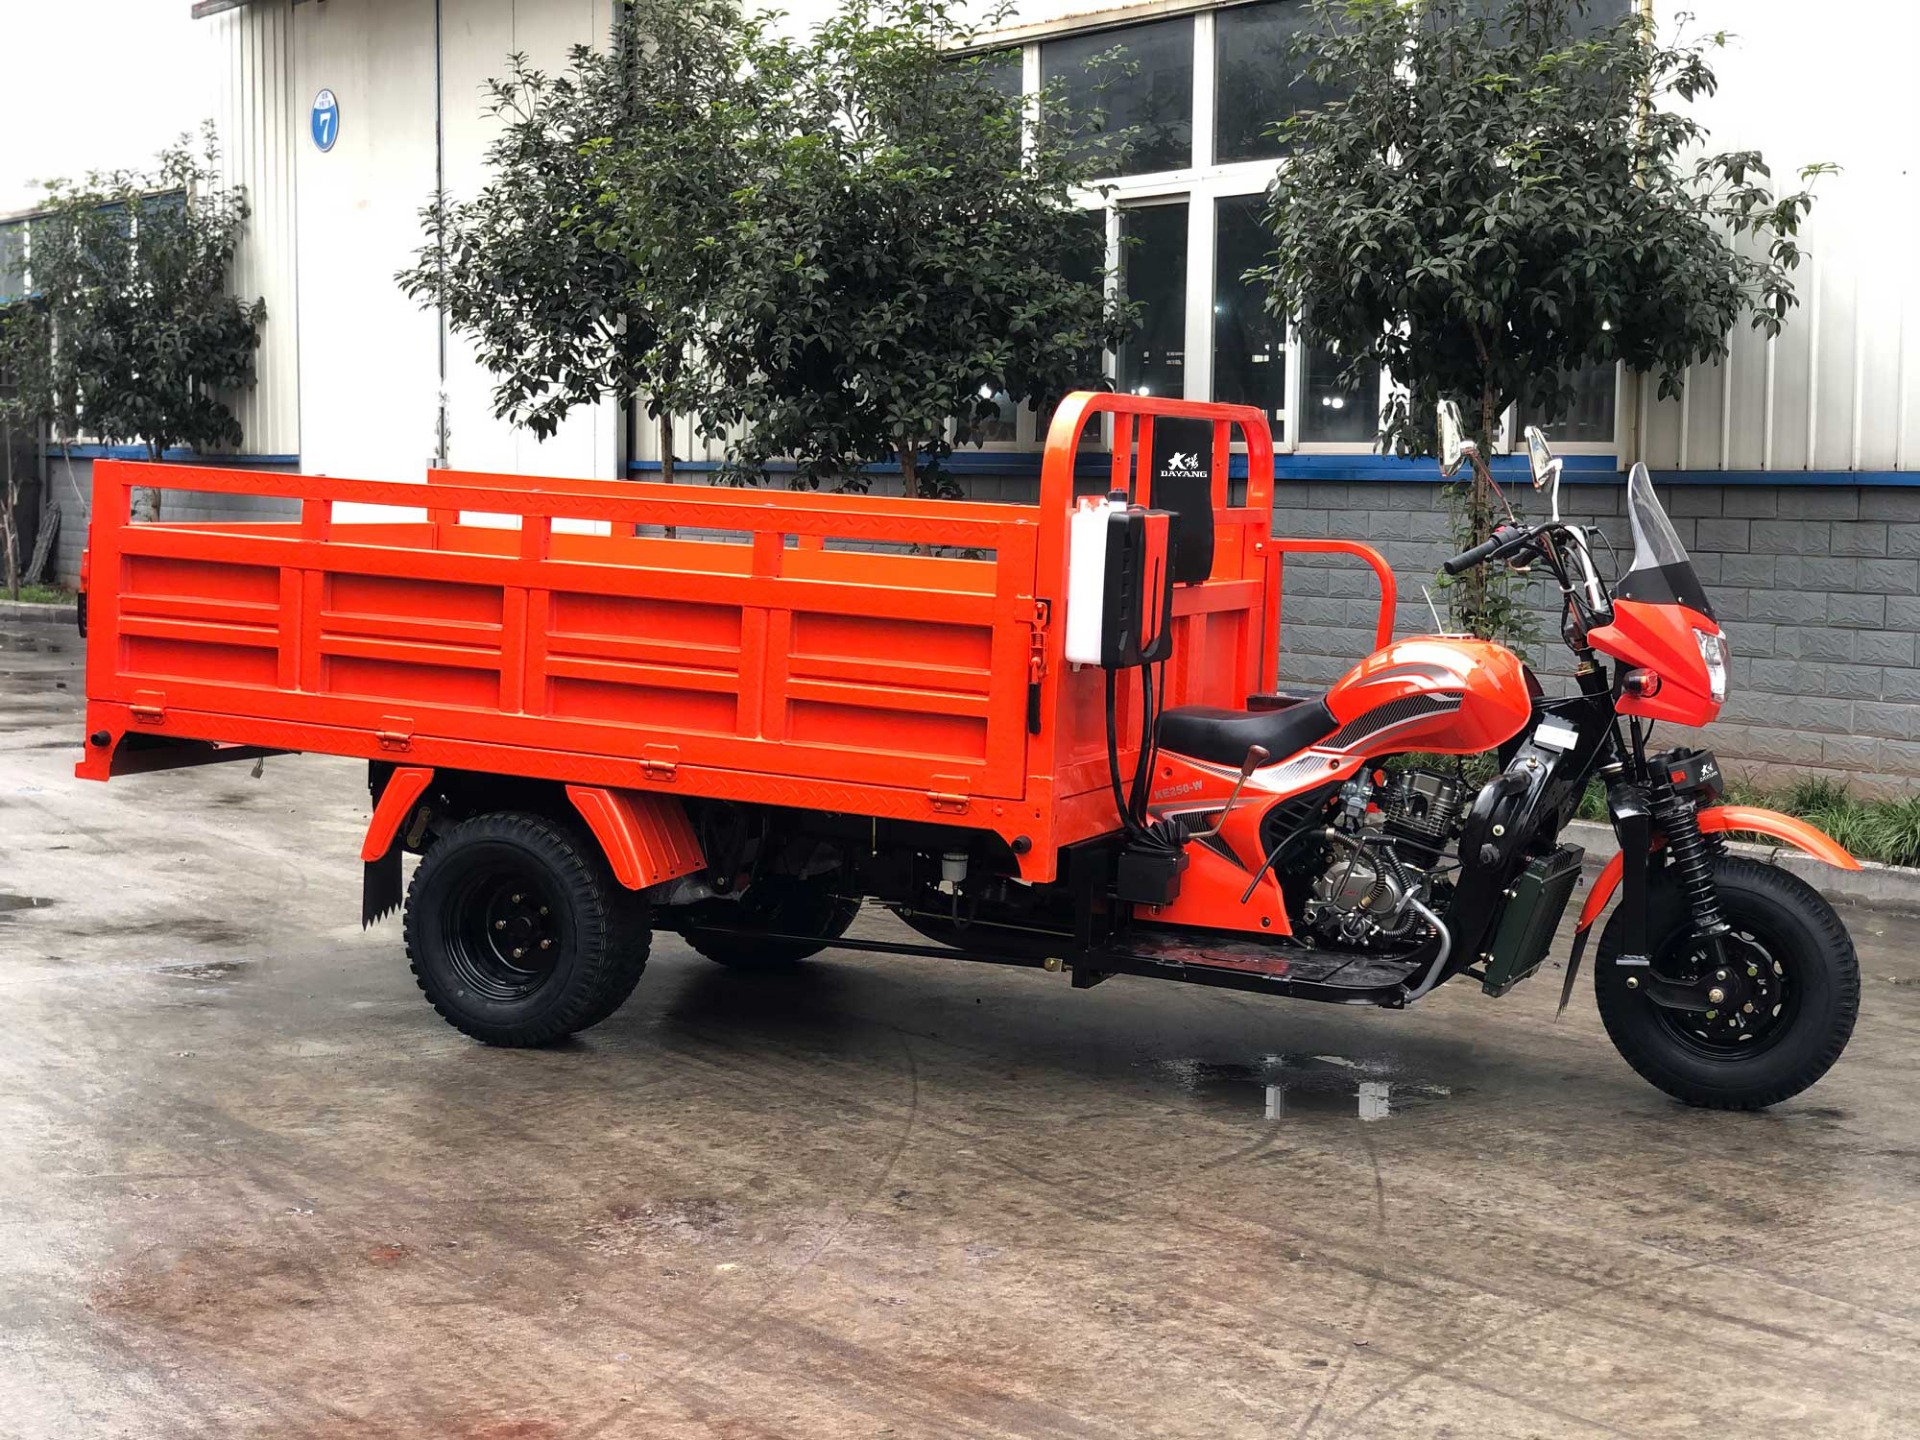 Motorized Tricycles 250cc Pomo Cargo Motorcycle Truck Big Wheel Tricycles Motorized Driven for Cargo